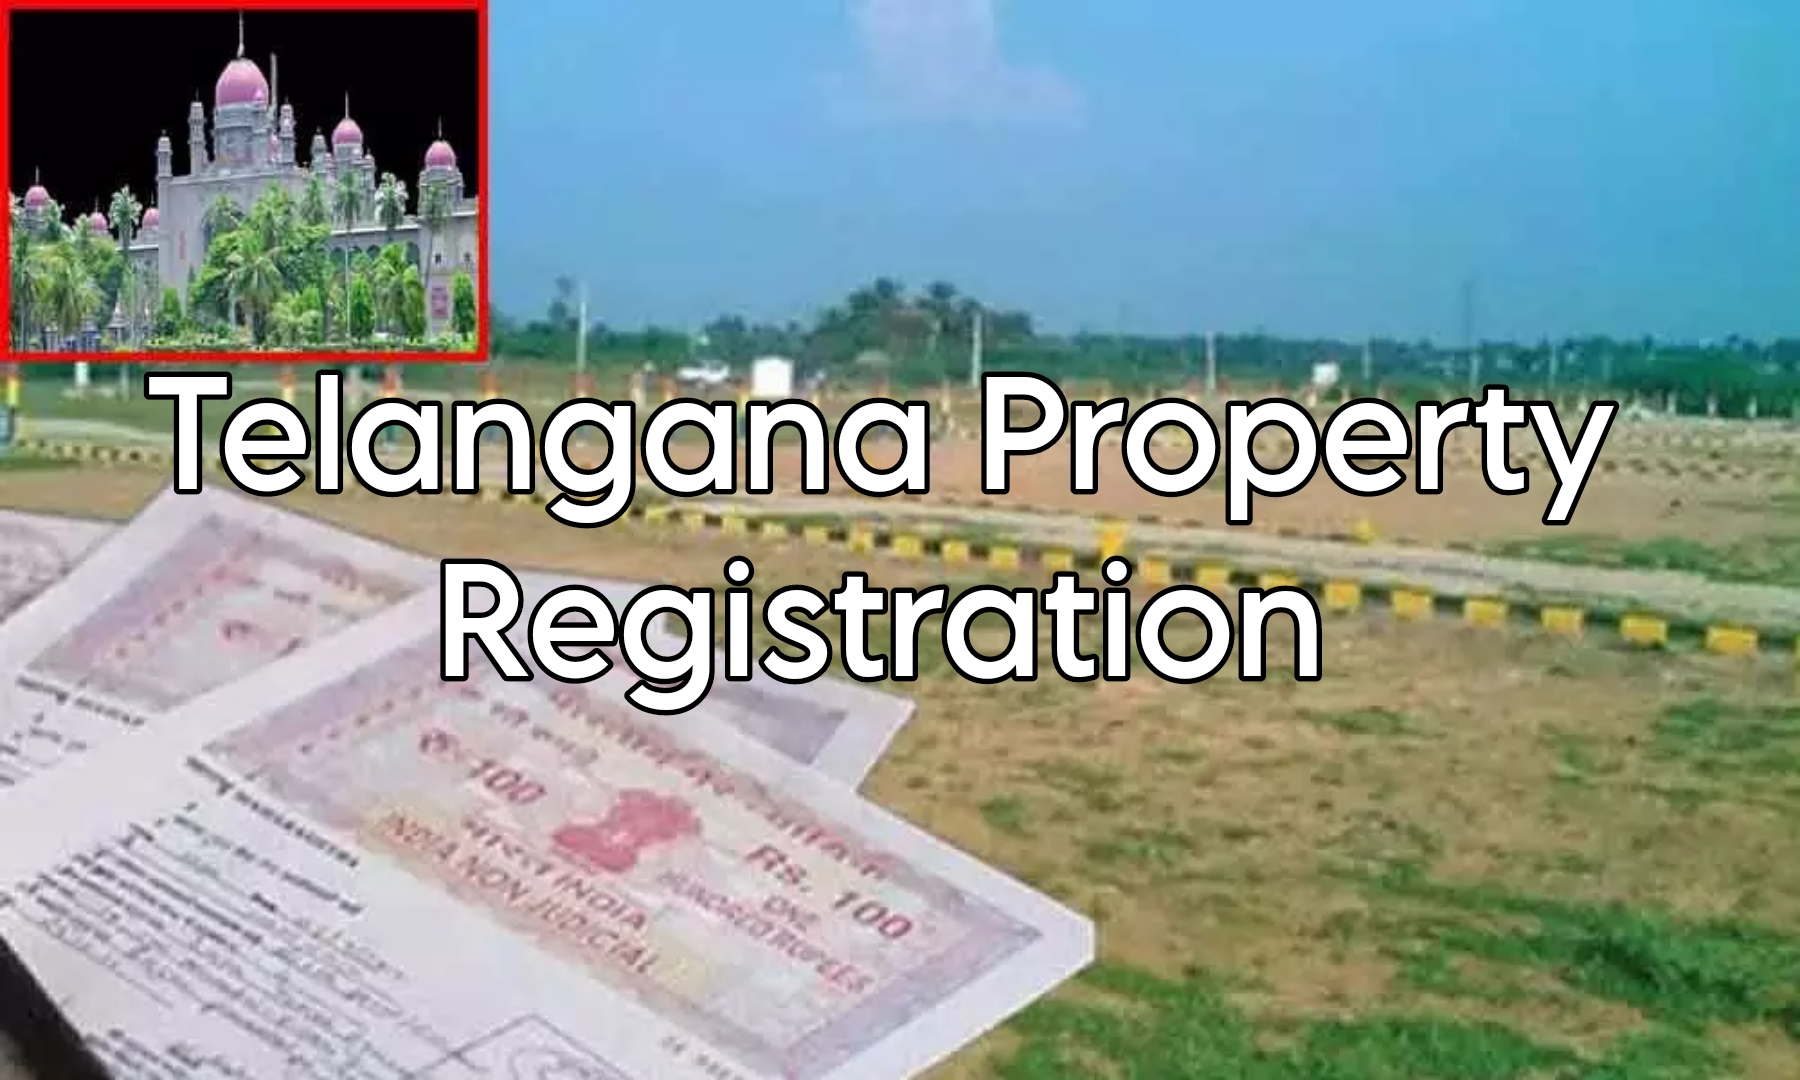 How to Register Property online in Andhra Pradesh?